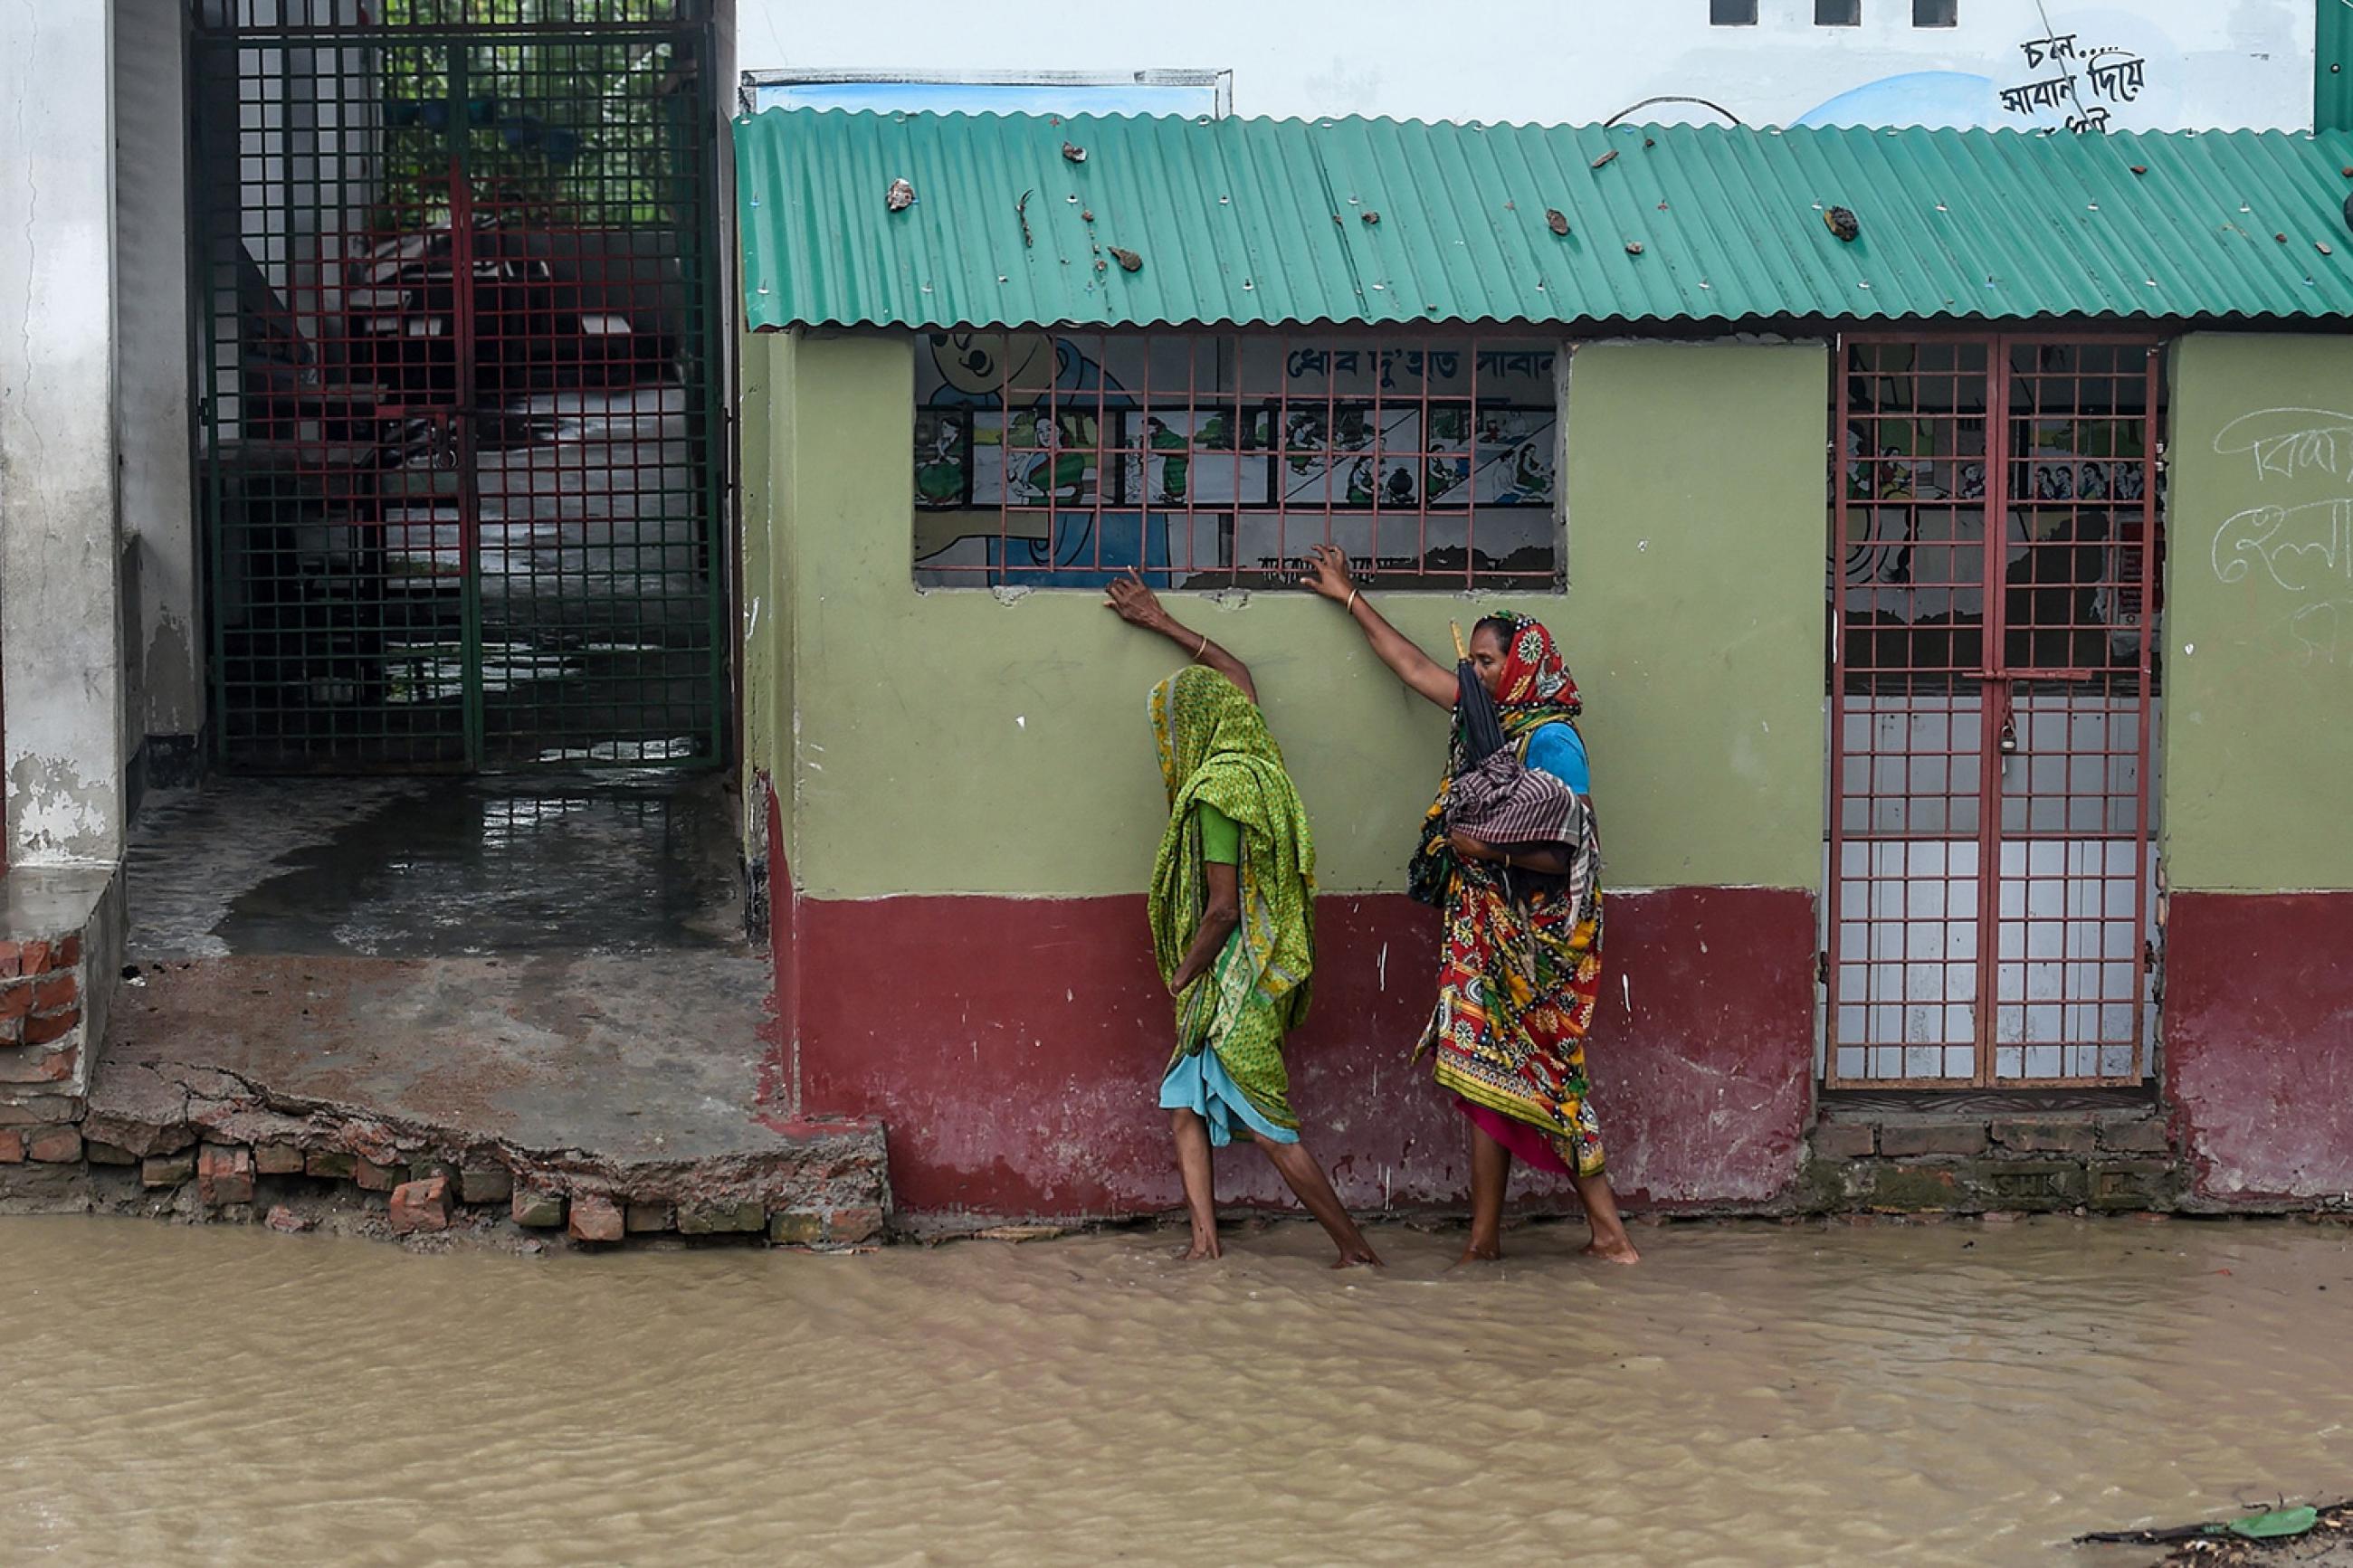 Residents walk along a house on a flooded street heading to a shelter ahead of the expected landfall of the "super cyclone" Amphan, in the Dacope of Khulna district, Bangladesh, on May 20, 2020. Photo shows two people walking and hanging on to a building as they navigate the flooded streets. AFP/Munir uz Zaman via Getty Images